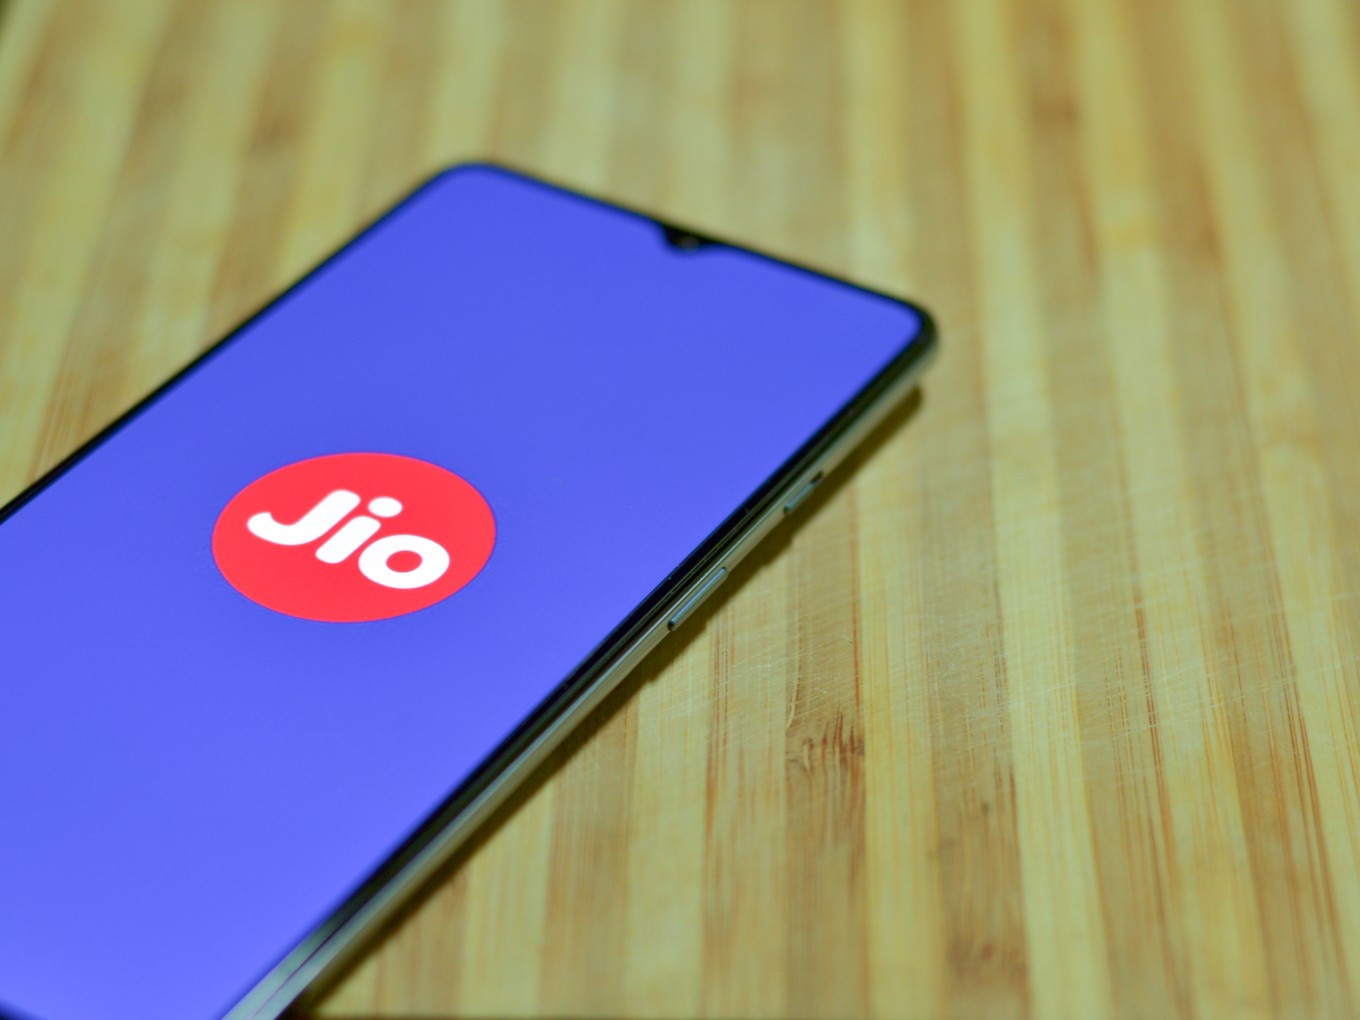 Jio To Launch Low-Cost 5G Phone, Laptop In Partnership With Google